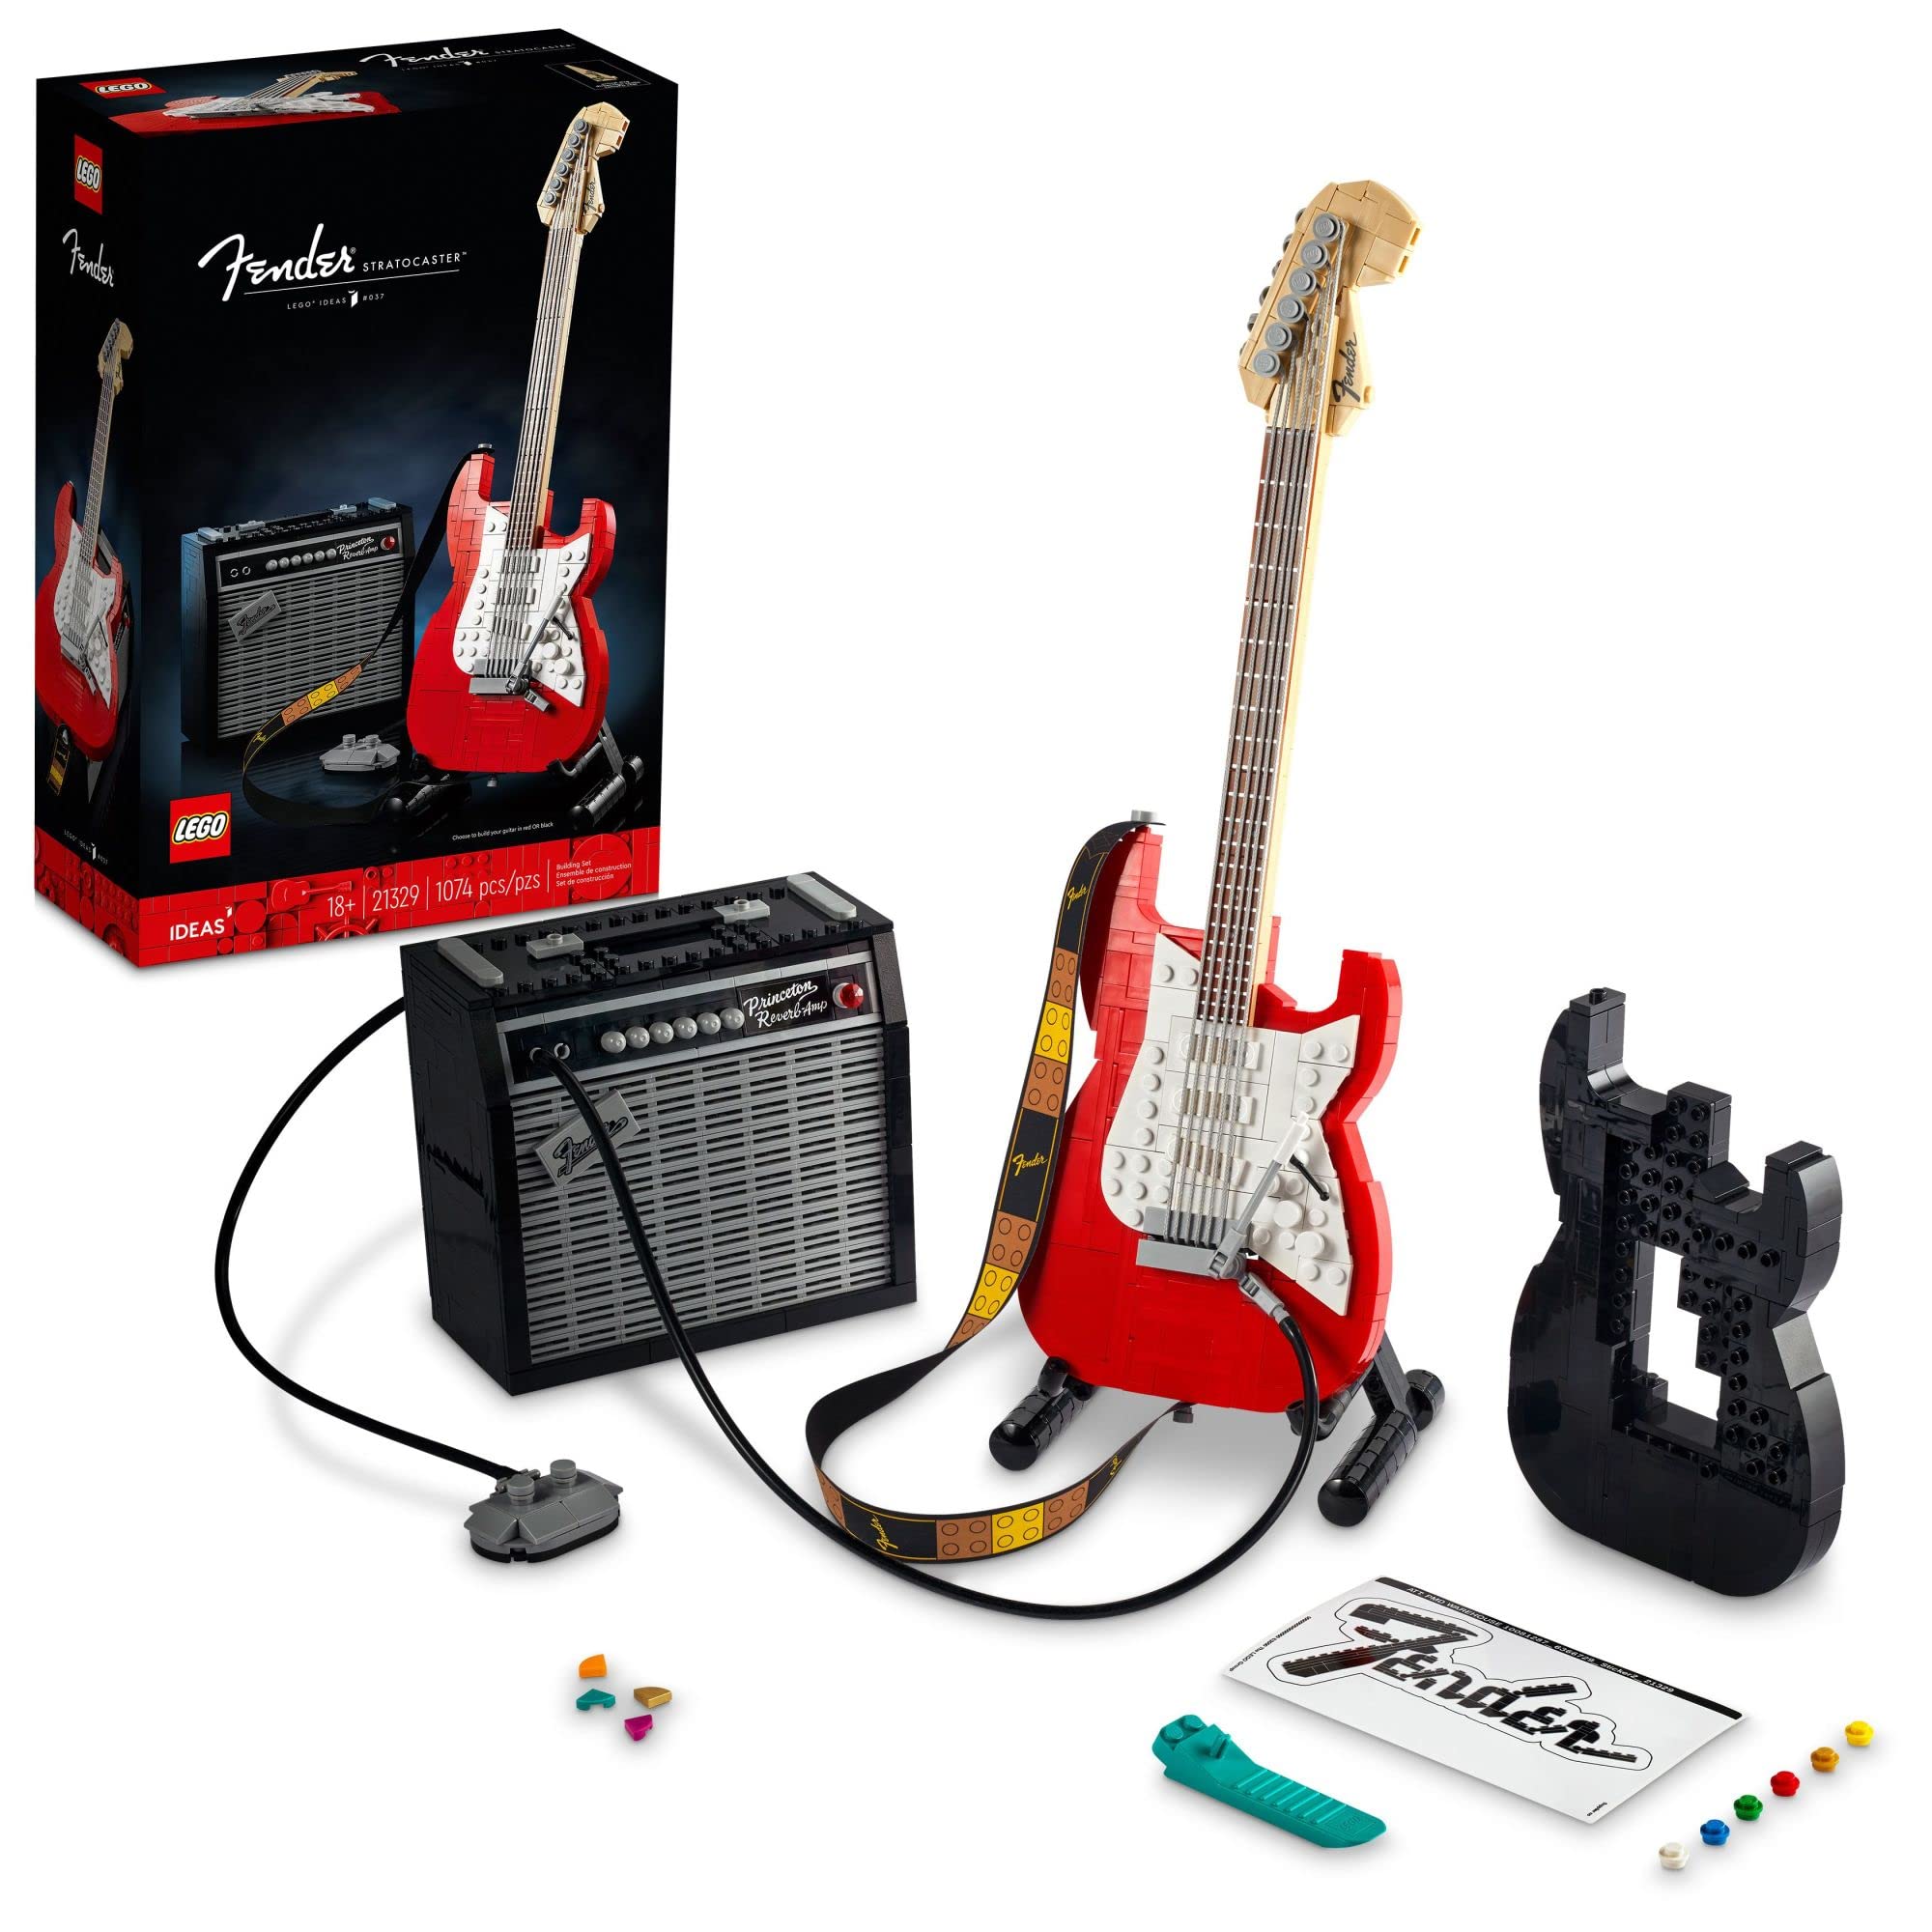 LEGO Ideas Fender Stratocaster 21329 DIY Guitar Model Building Set for Music Lovers, Gift from Sons or Daughters to Rock This Father's Day, 65 Princeton Reverb Amplifier & Authentic Accessories